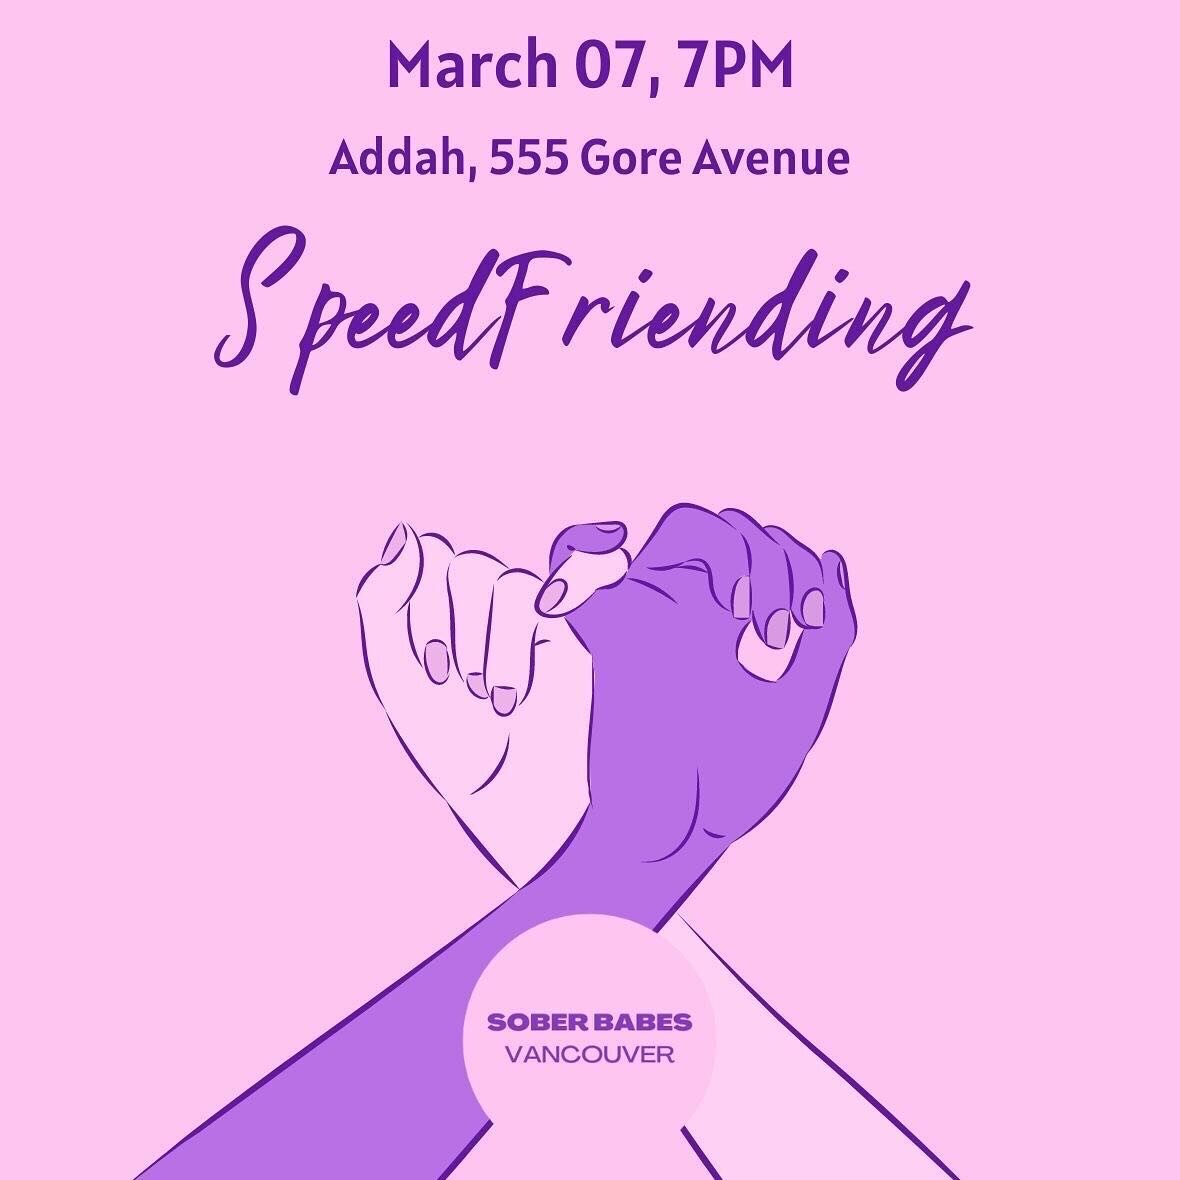 *SOLD OUT* 
🌟 Join us on March 7th at Addah for a special Sober Speed Friending event! 🌈 Let&rsquo;s break the ice, connect, and make meaningful friendships within the vibrant LGBTQ+ community and women in Vancouver. 💖 

Love comes in many forms, 